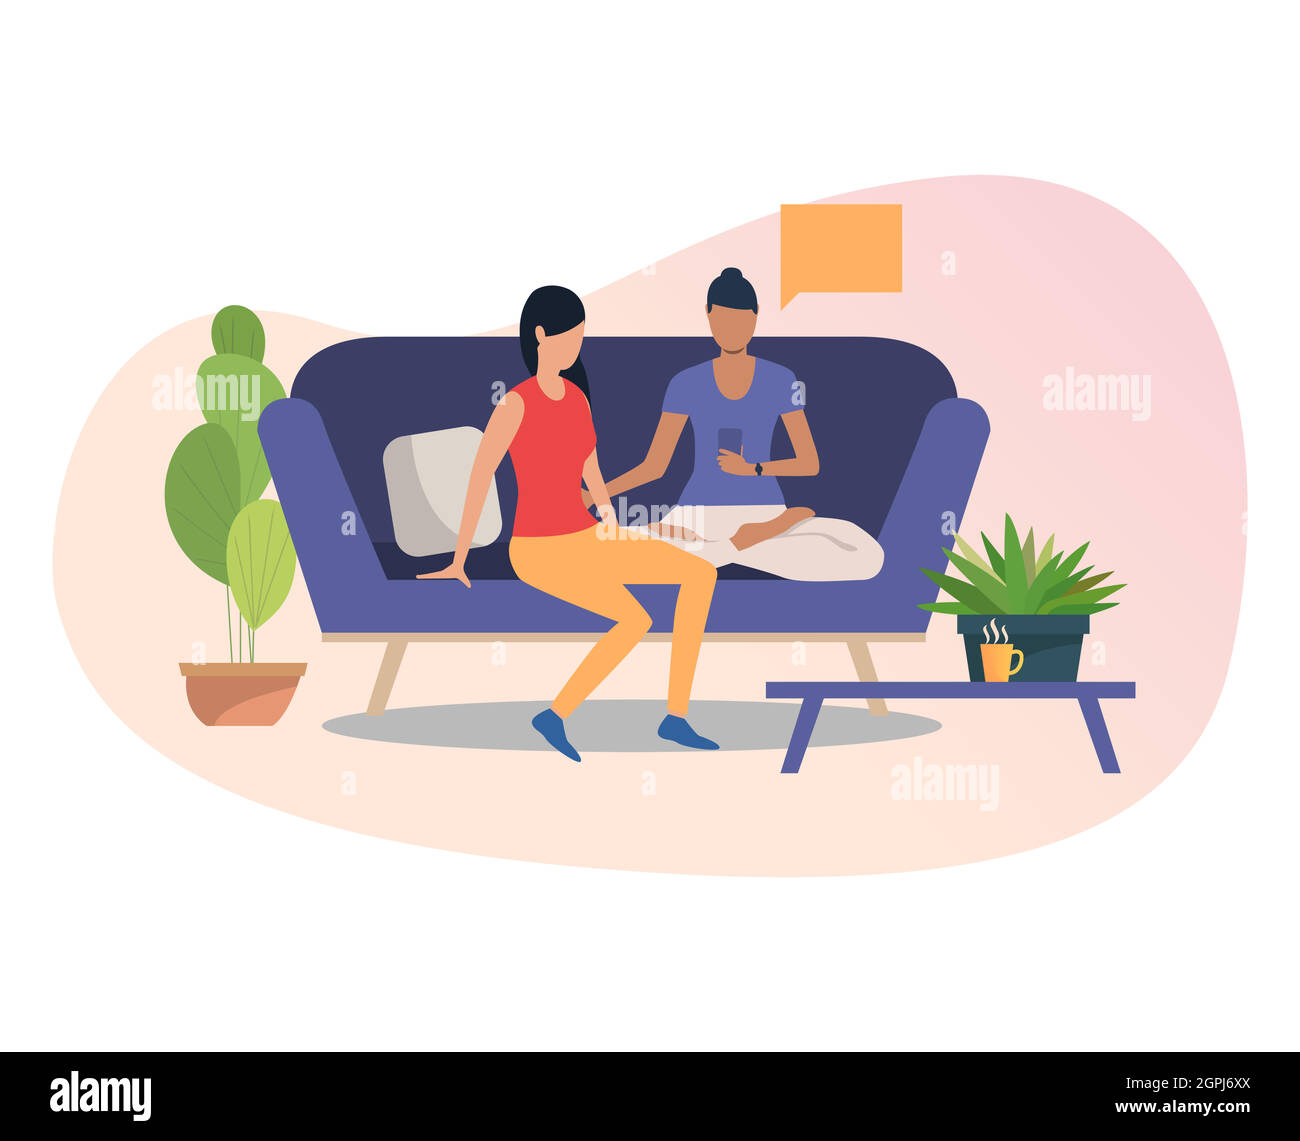 Female friends using smartphone together Stock Vector